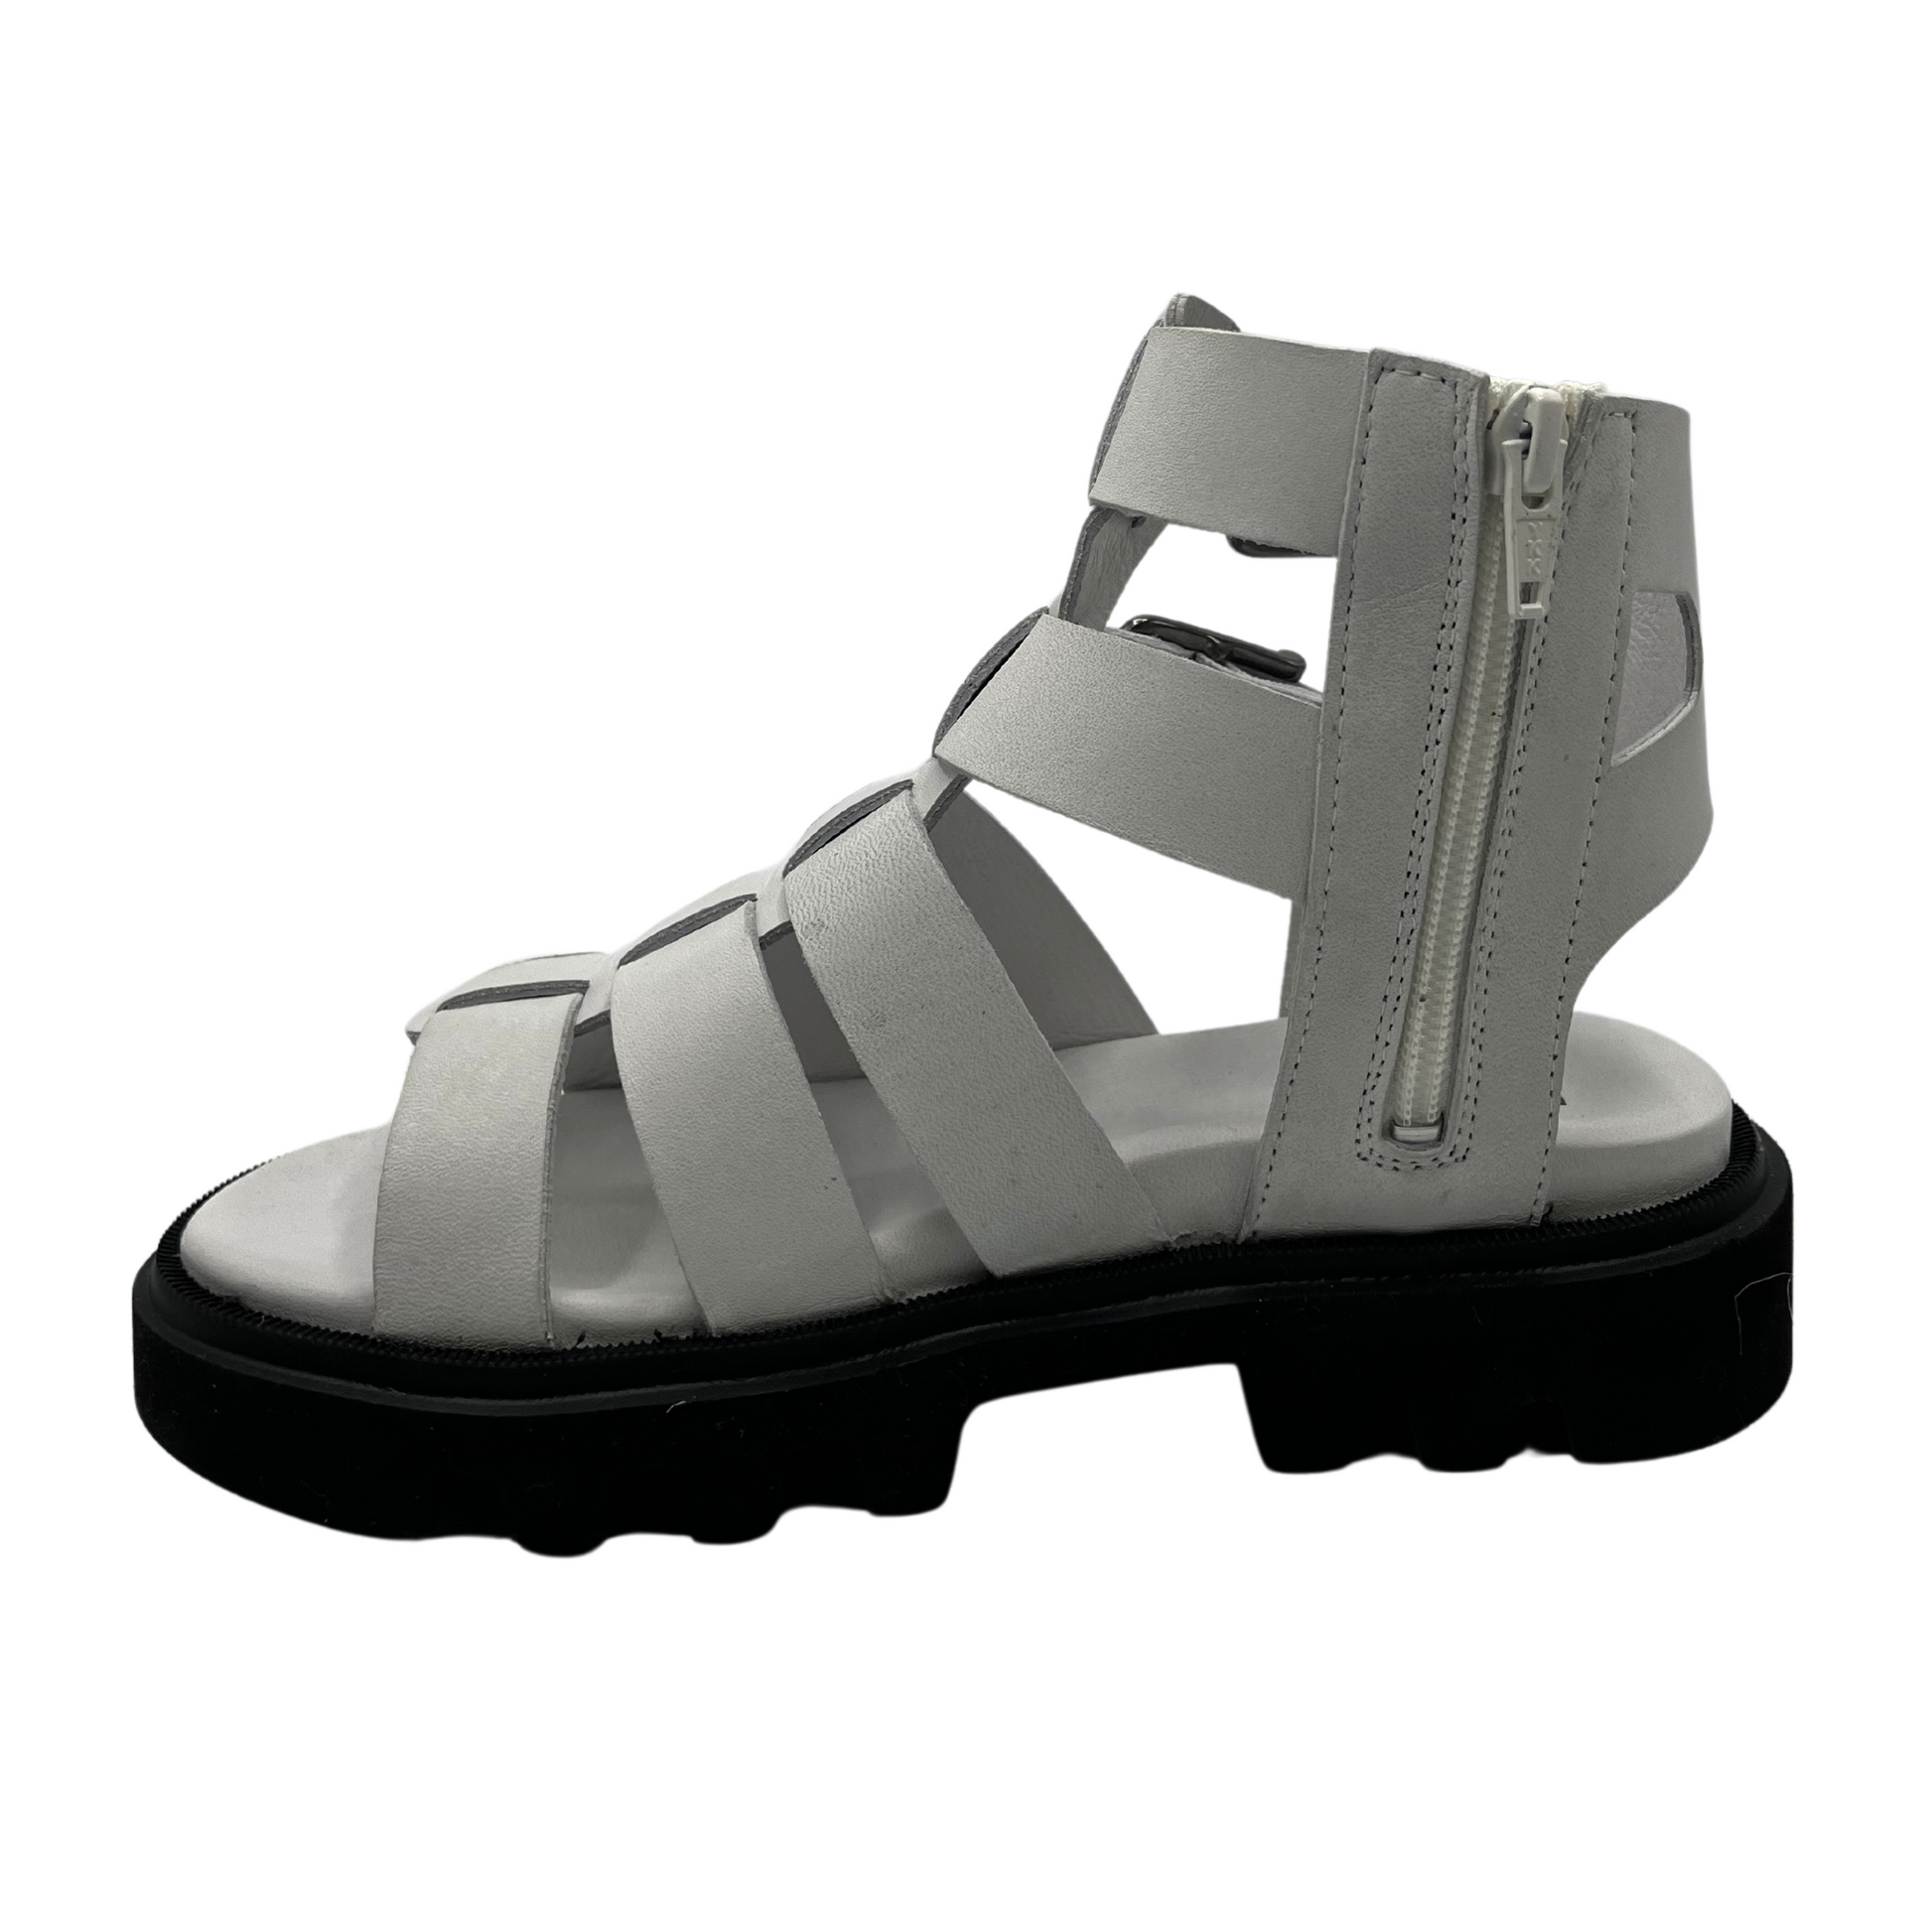 Left facing view of white leather gladiator sandal with black rubber outsole. Lined footbed and double buckle straps